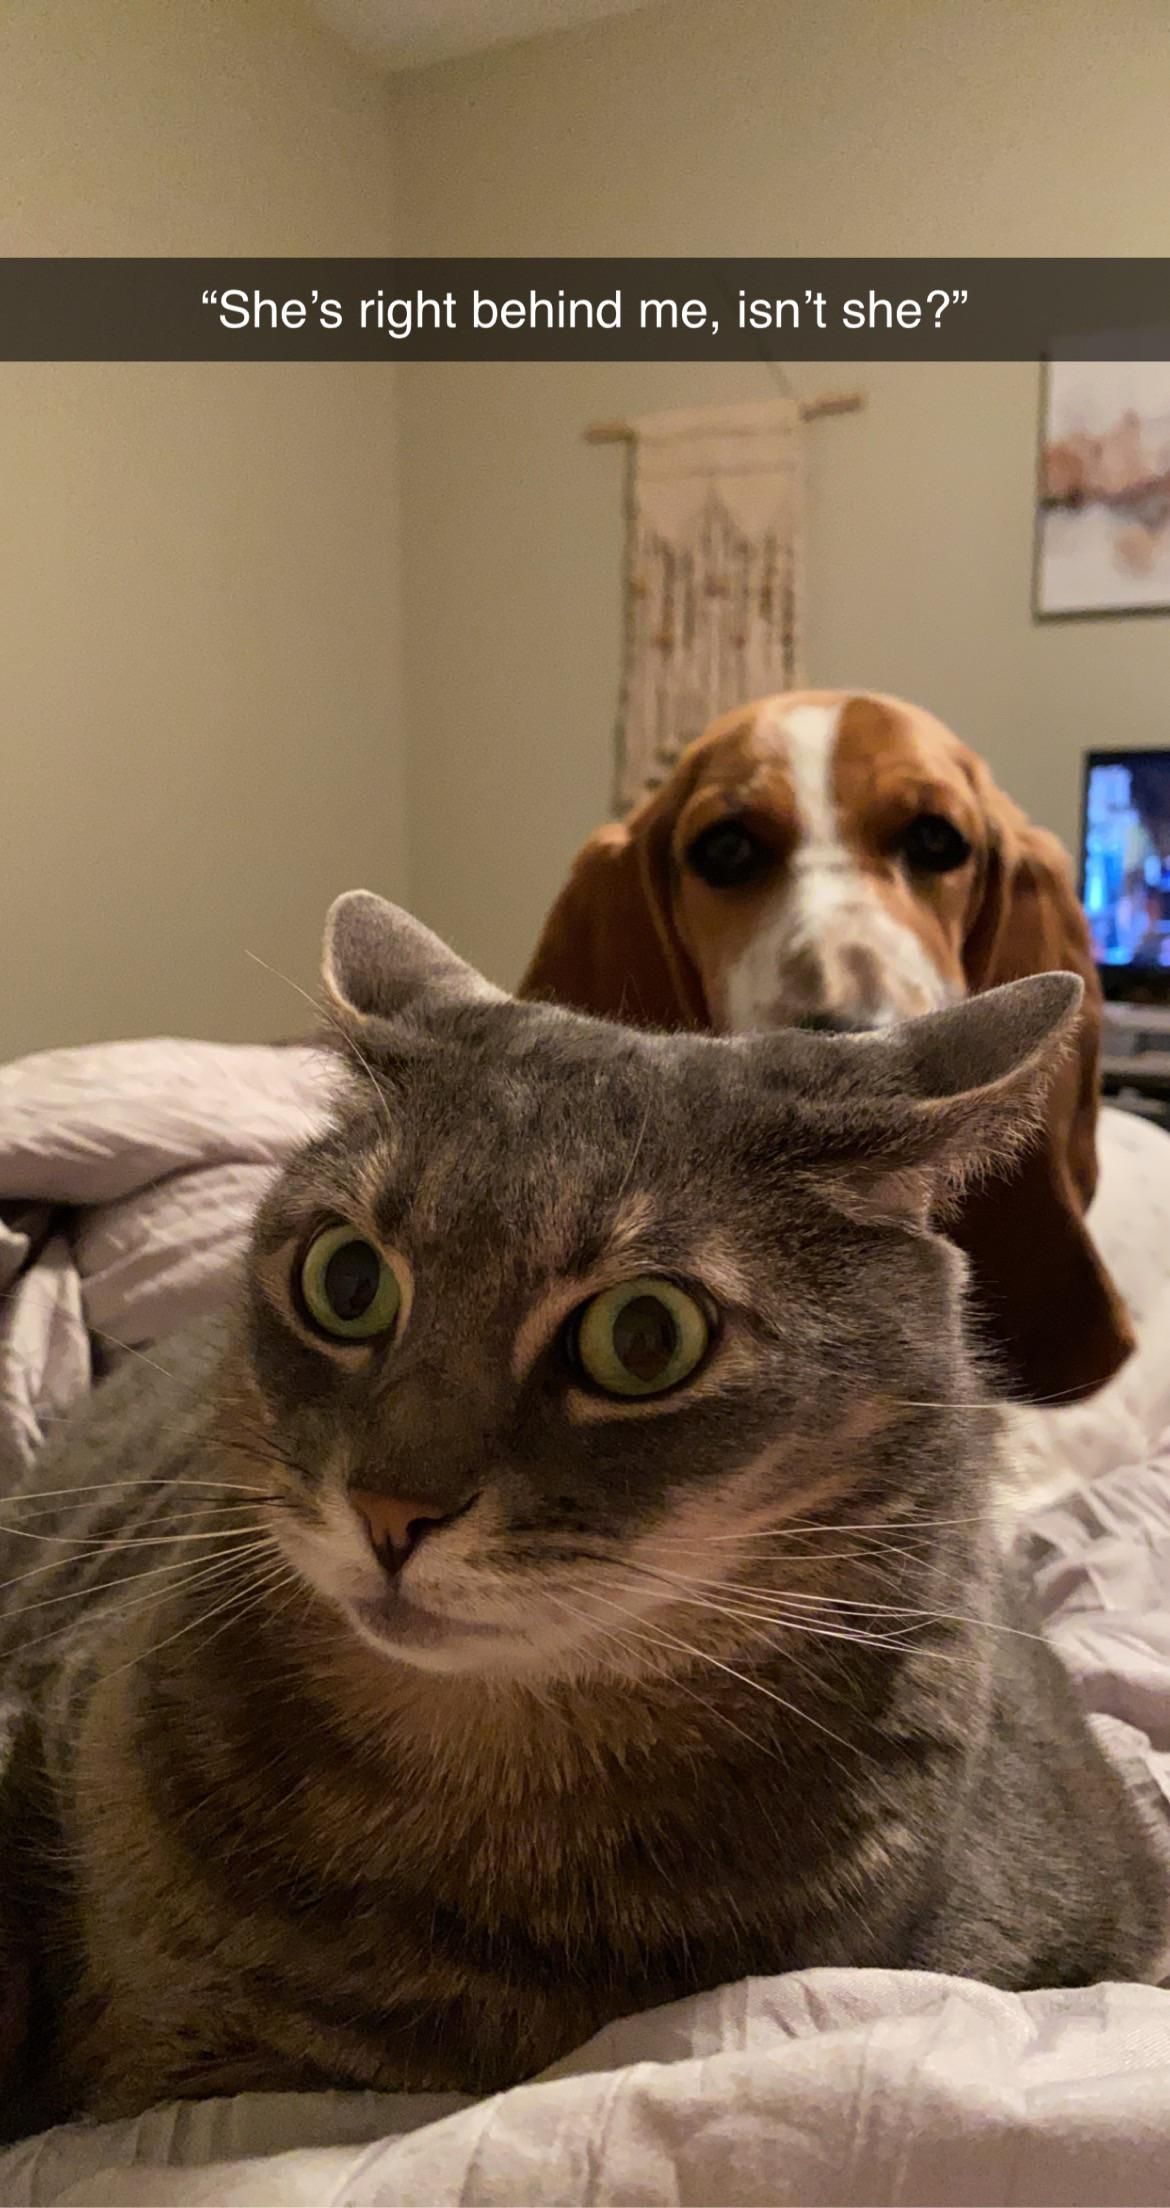 She’s right behind me, isn’t she?